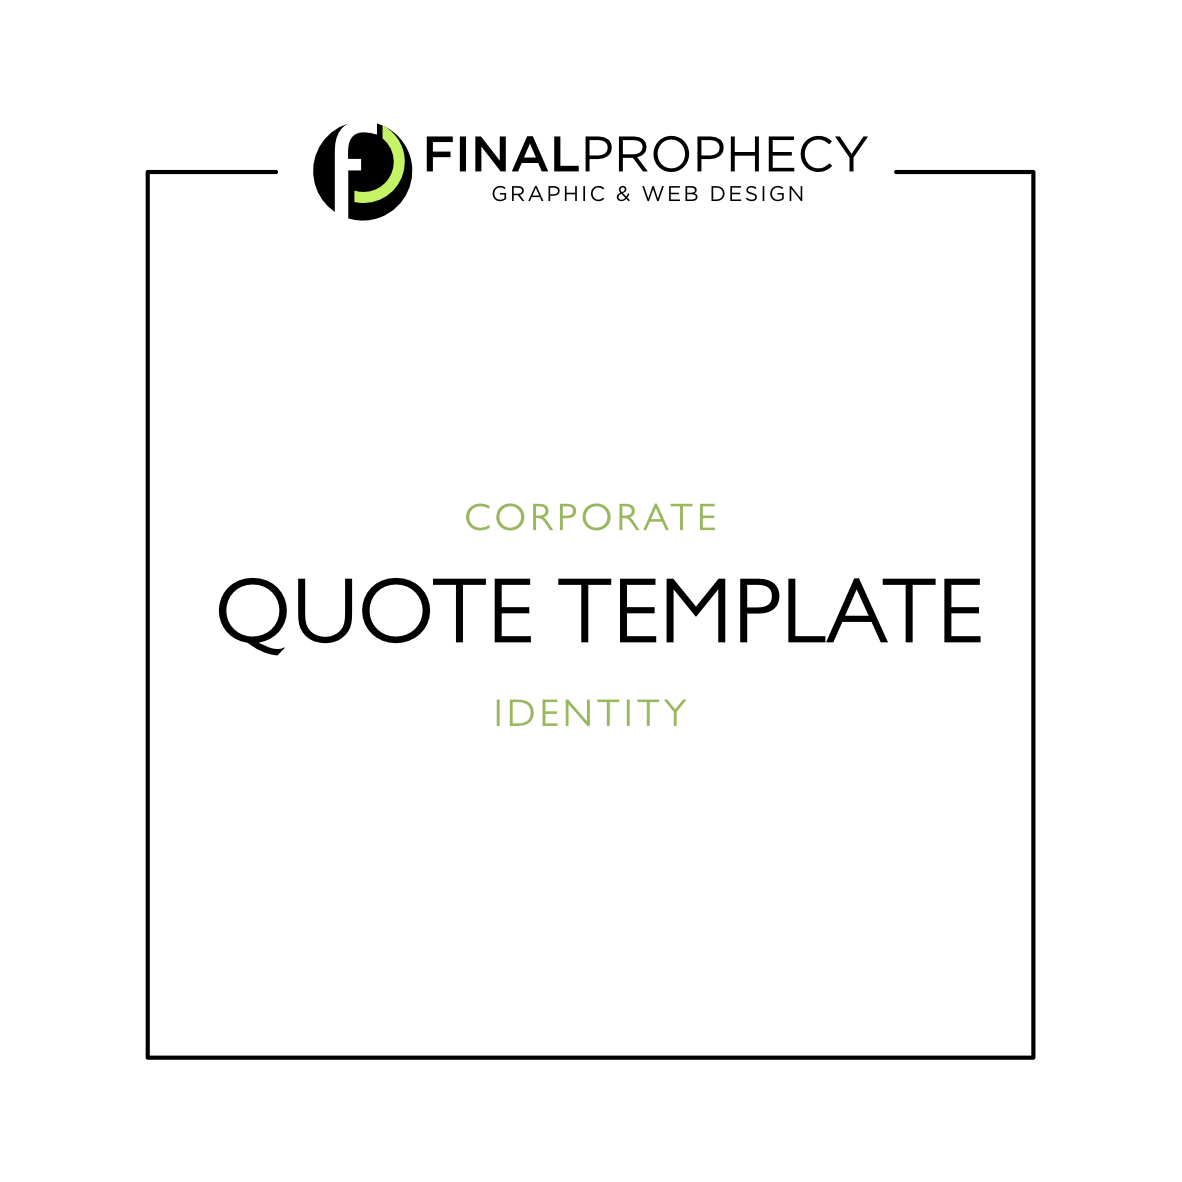 quote-template-final-prophecy-graphic-web-design